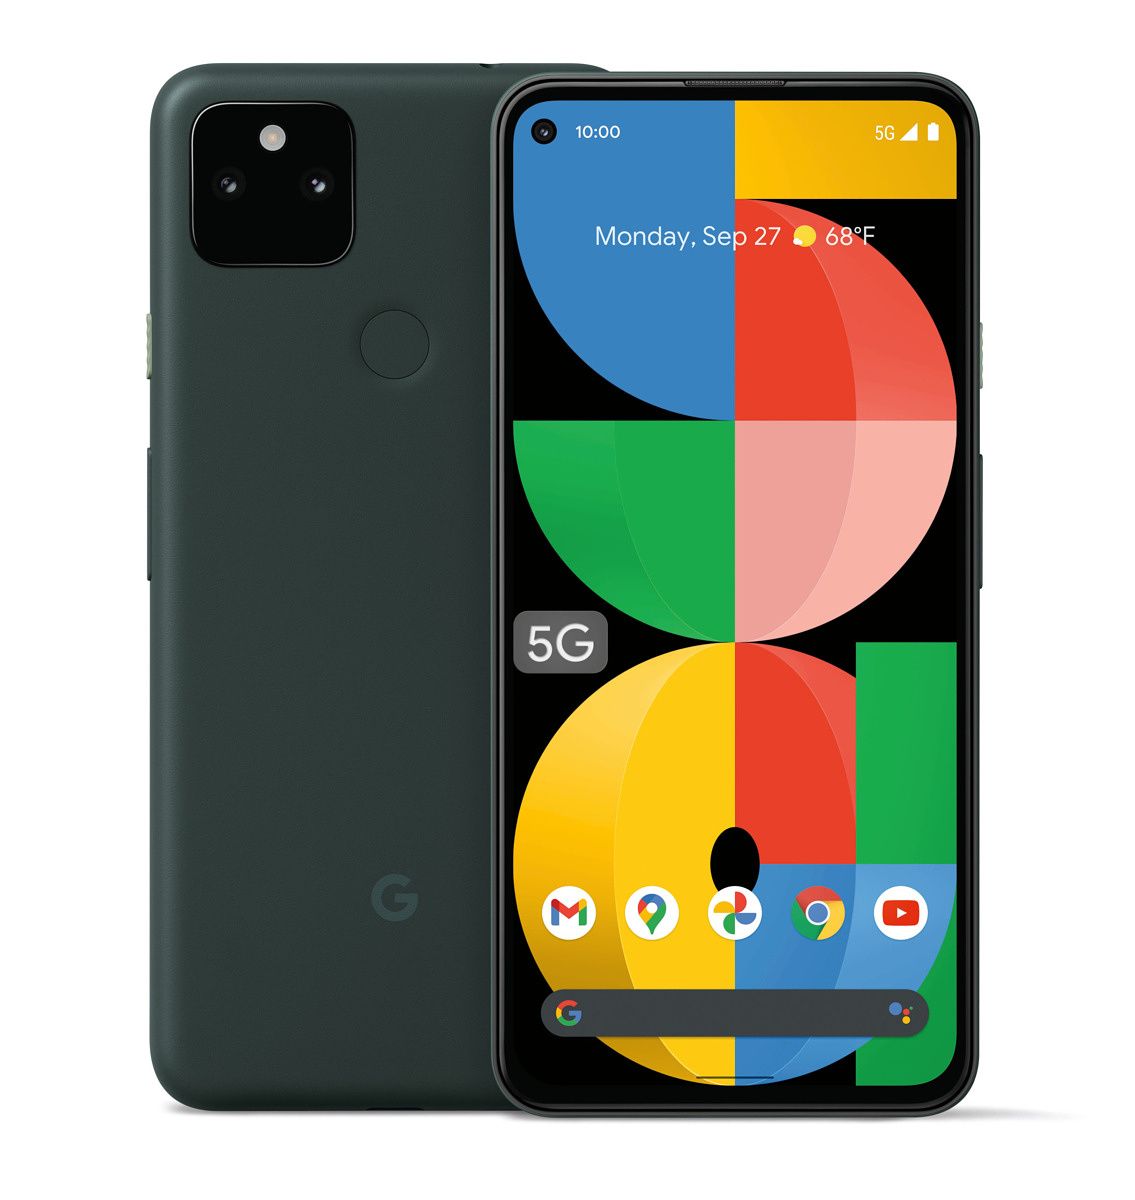 The Pixel 5a (5G) is the successor to the Pixel 4a 5G from last year with some minor changes that make it a great mid-range offering.